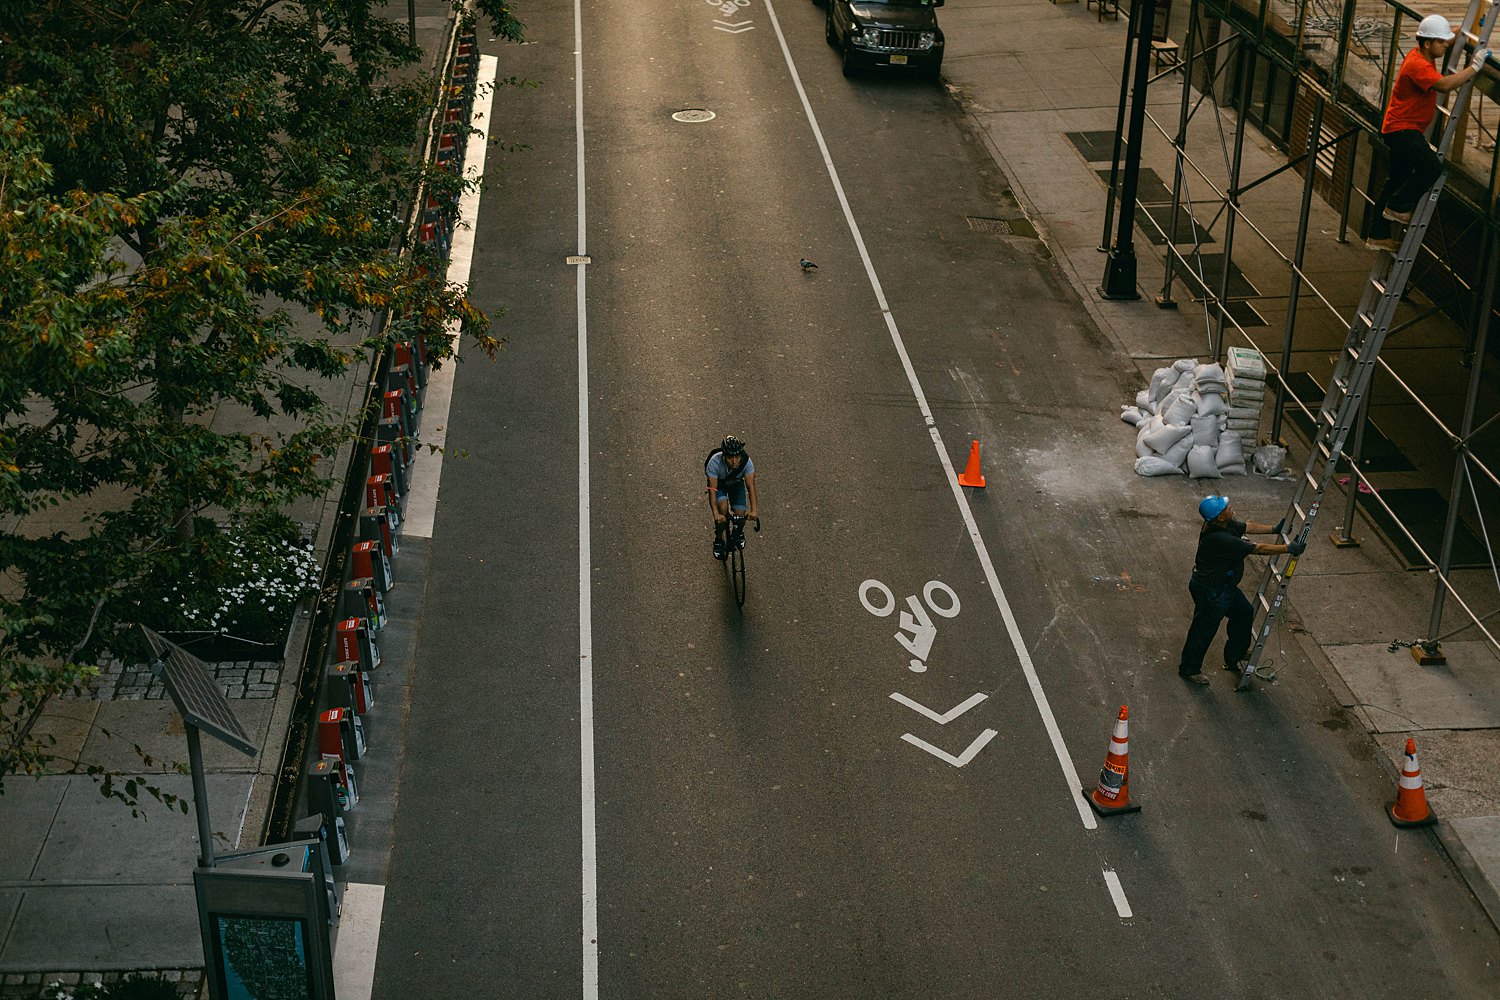 Man on bicycle NYC street from above in early morning light places to visit in New York